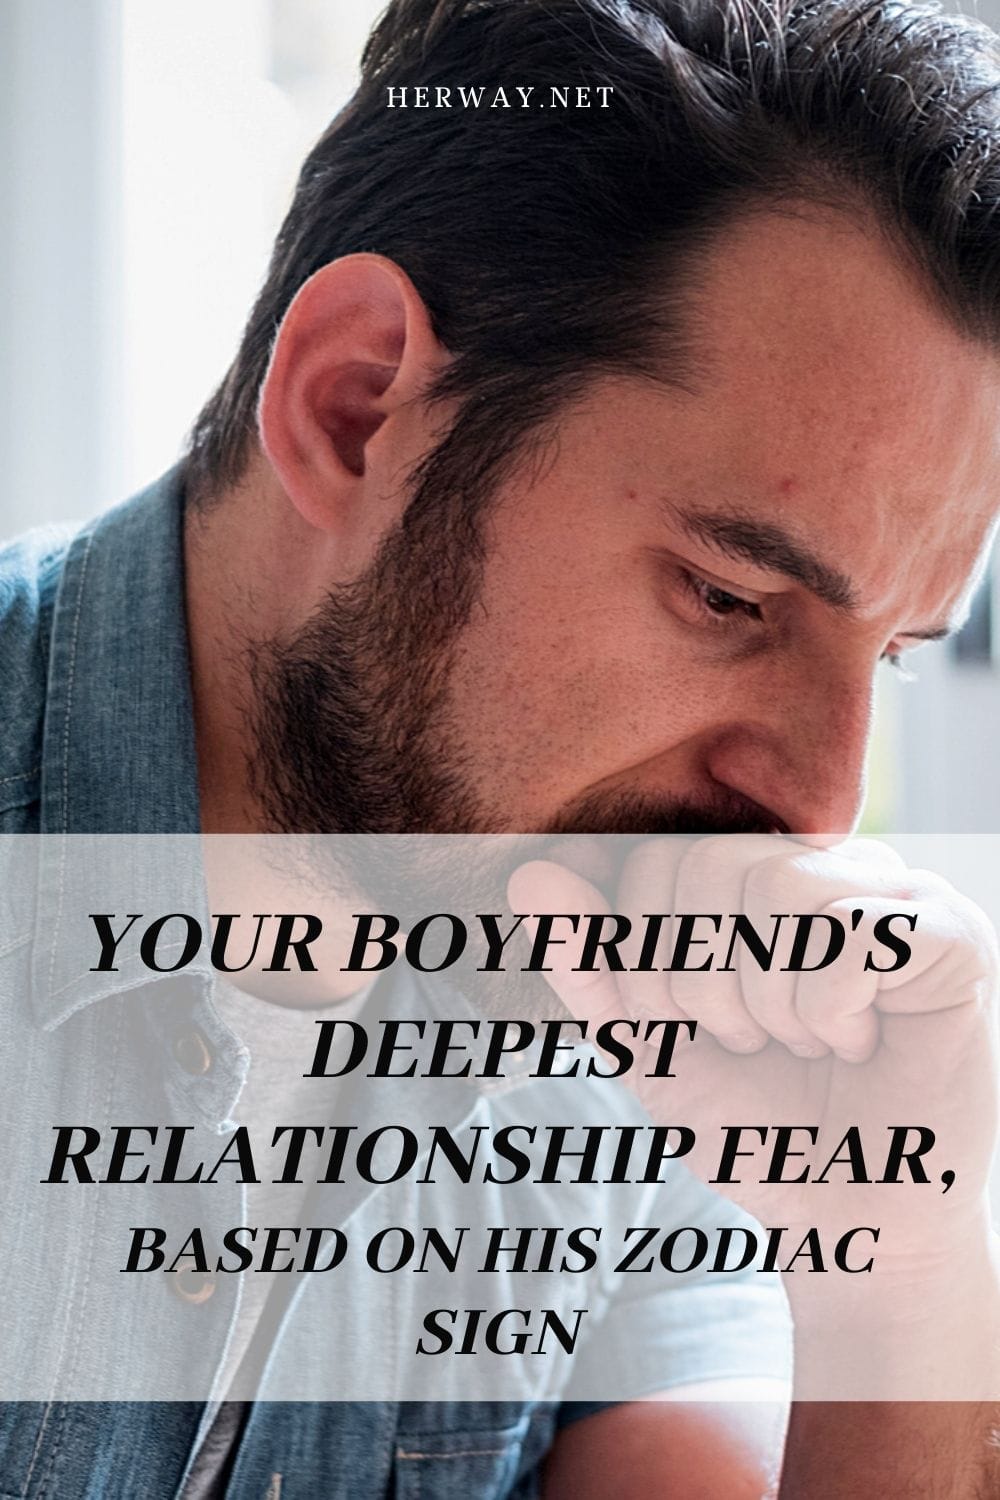 Your Boyfriend's Deepest Relationship Fear, Based On His Zodiac Sign